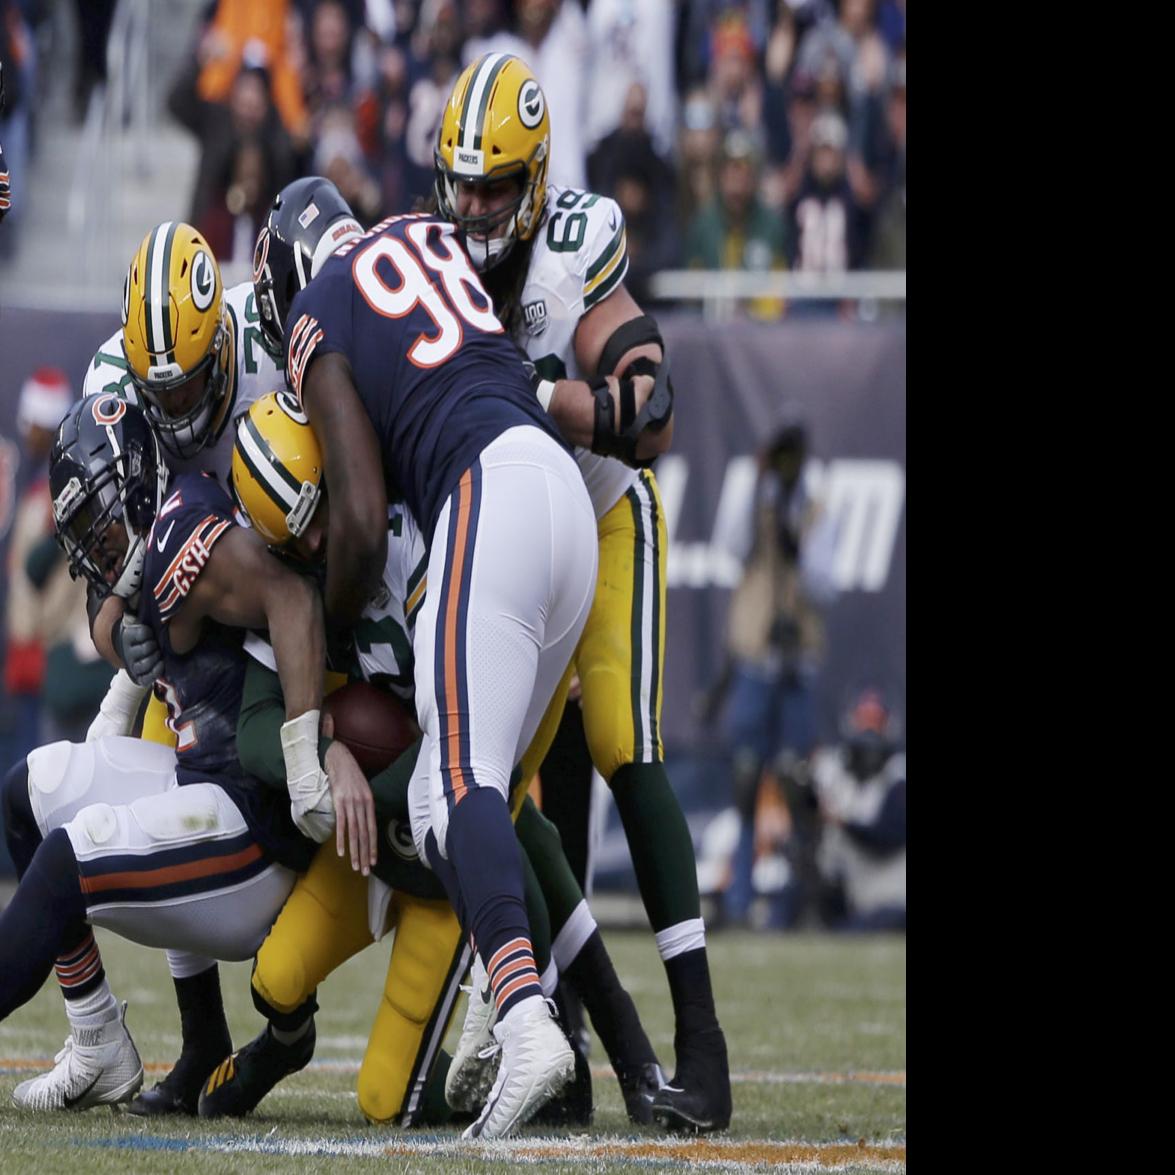 From Khalil Mack S Back Sack To Leonard Floyd S Finishing Touch Bears Take Down Aaron Rodgers Football Herald Review Com